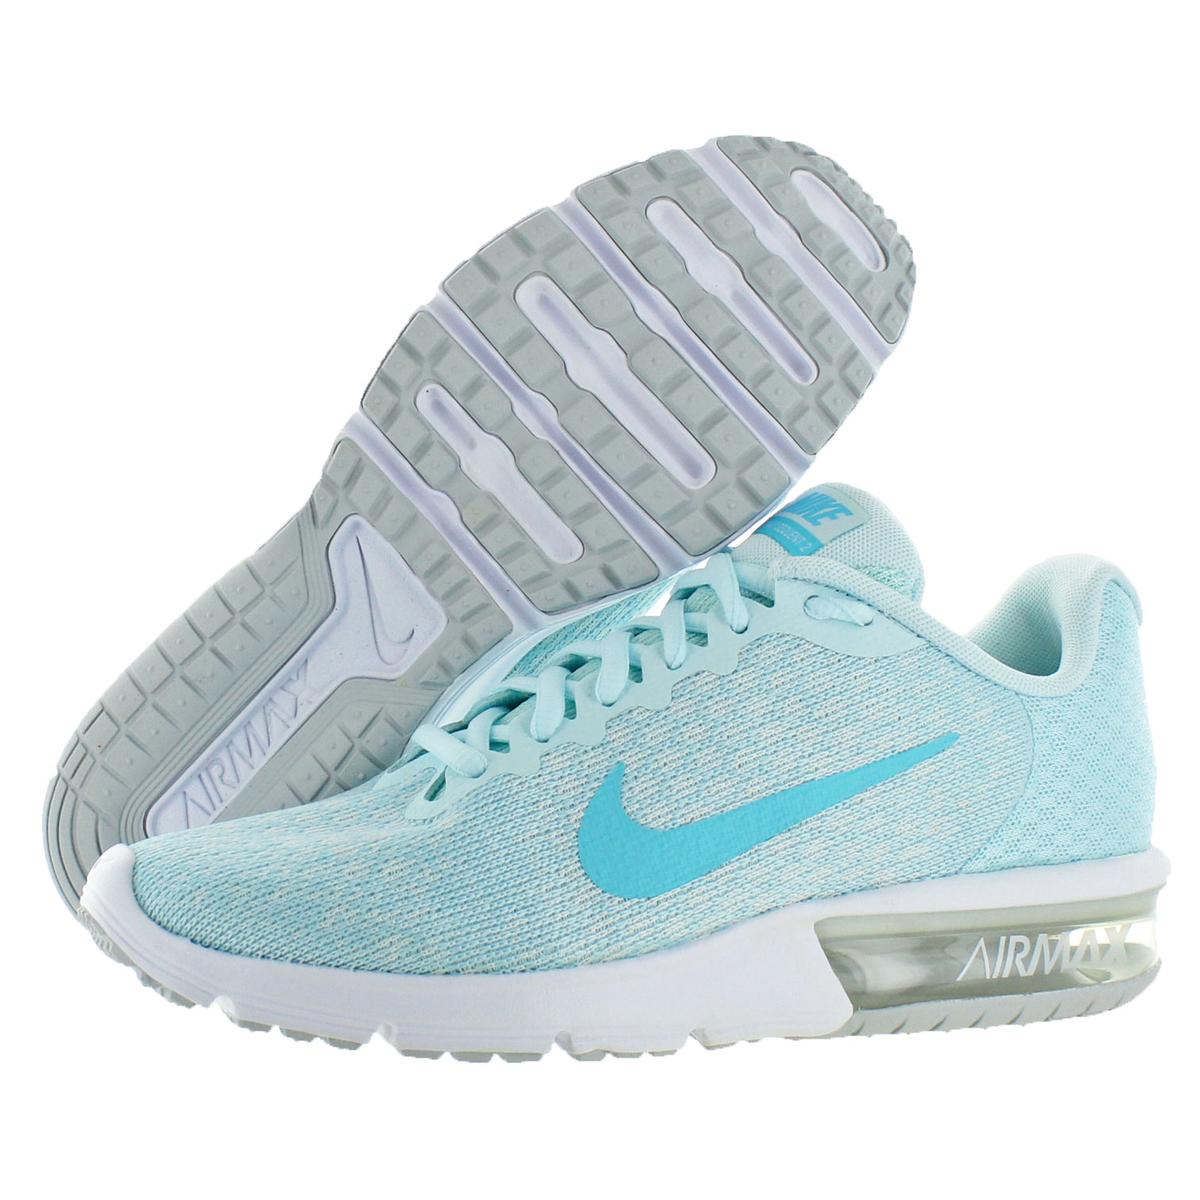 medalist Viewer Encyclopedia Nike Air Max Sequent 2 Womens FitSole Breathable Running Shoes